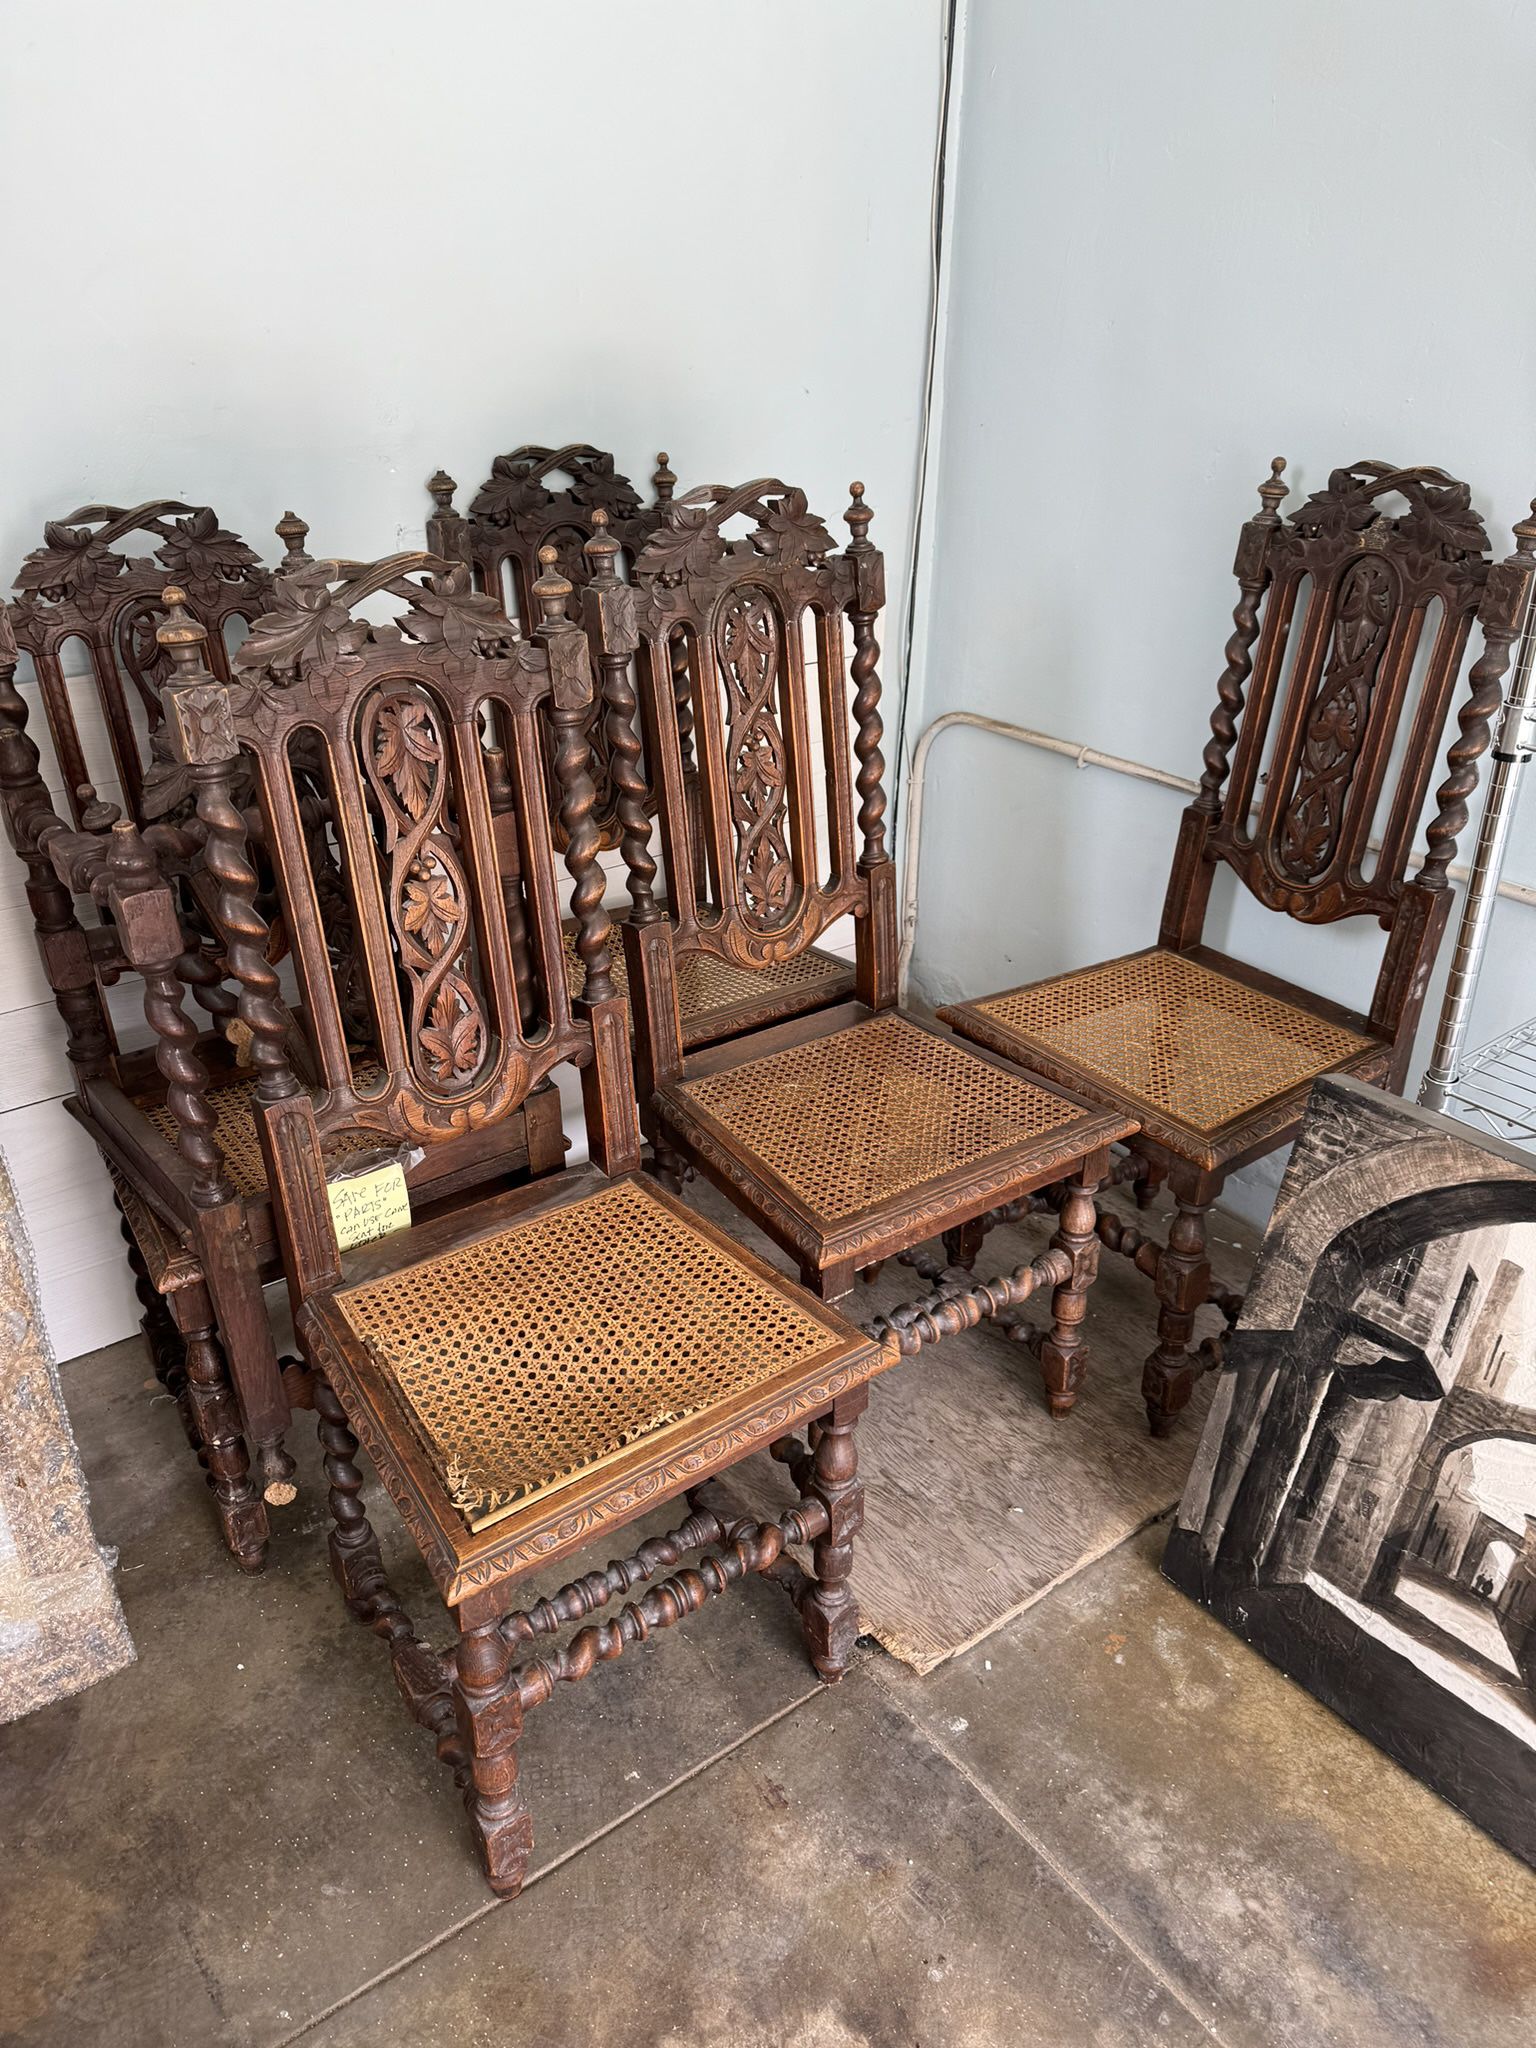 Free antique Chairs 